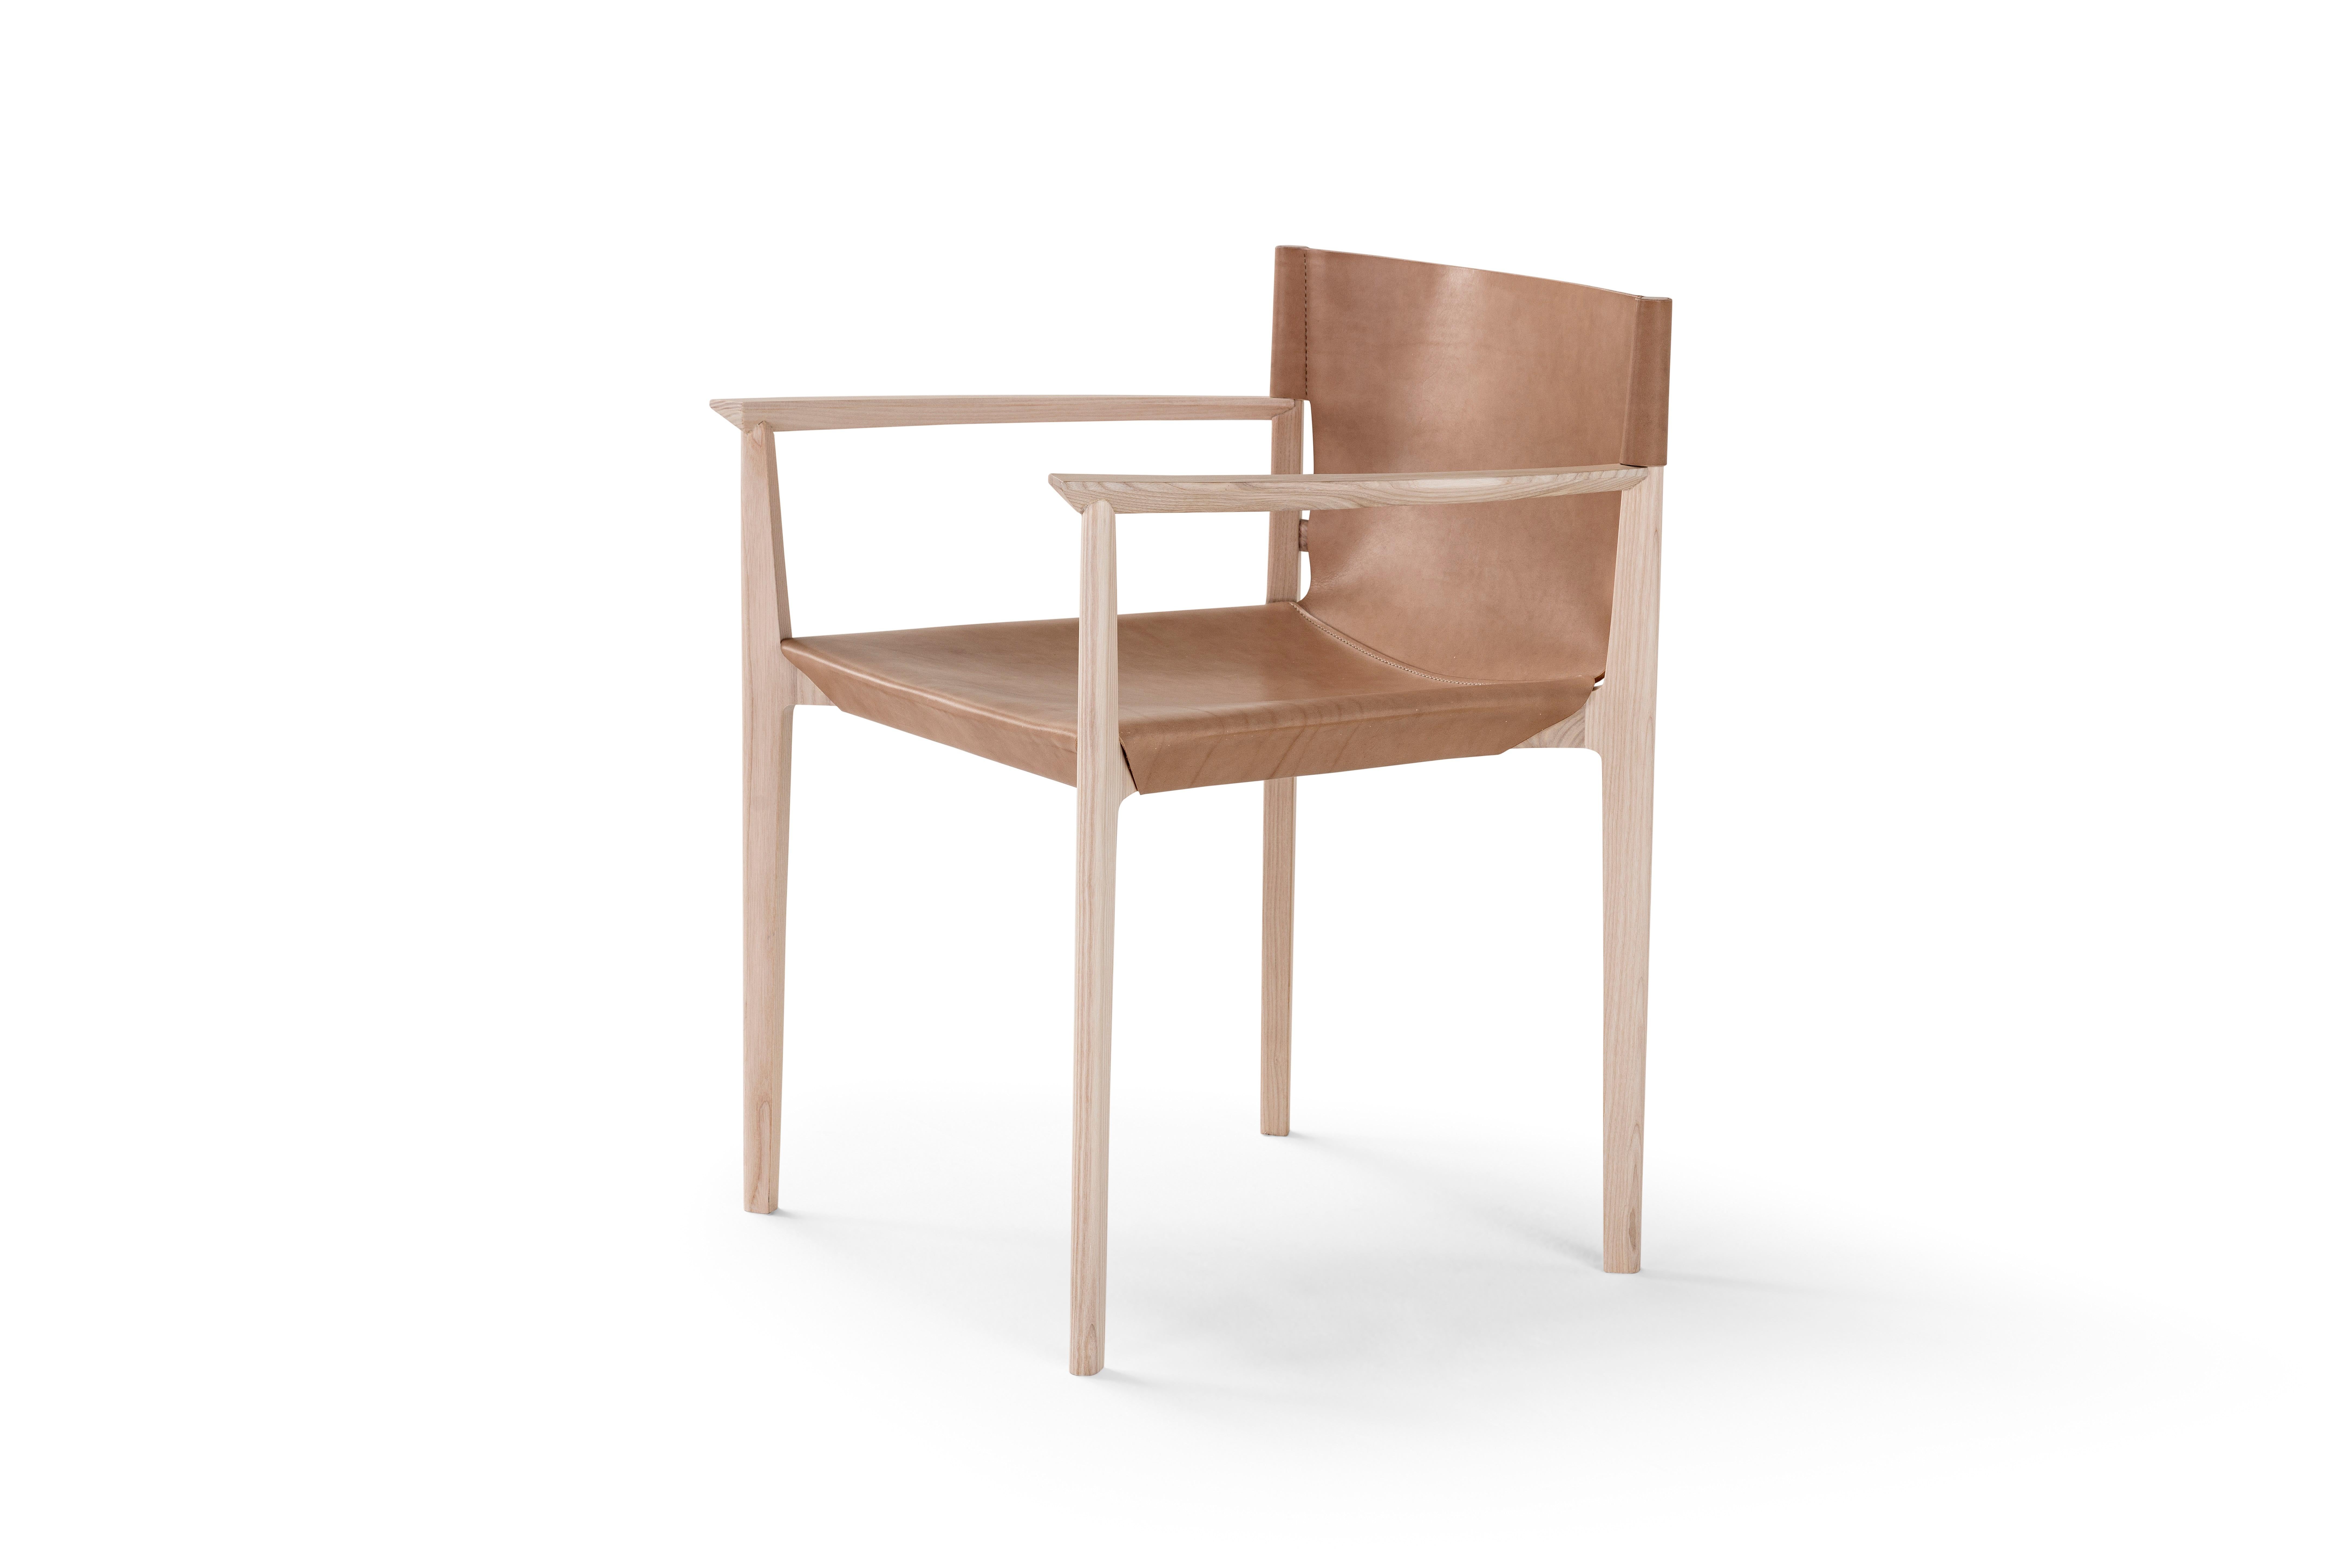 Organic Modern Contemporary Wooden Chair 'Stilt', Cuoio Leather For Sale